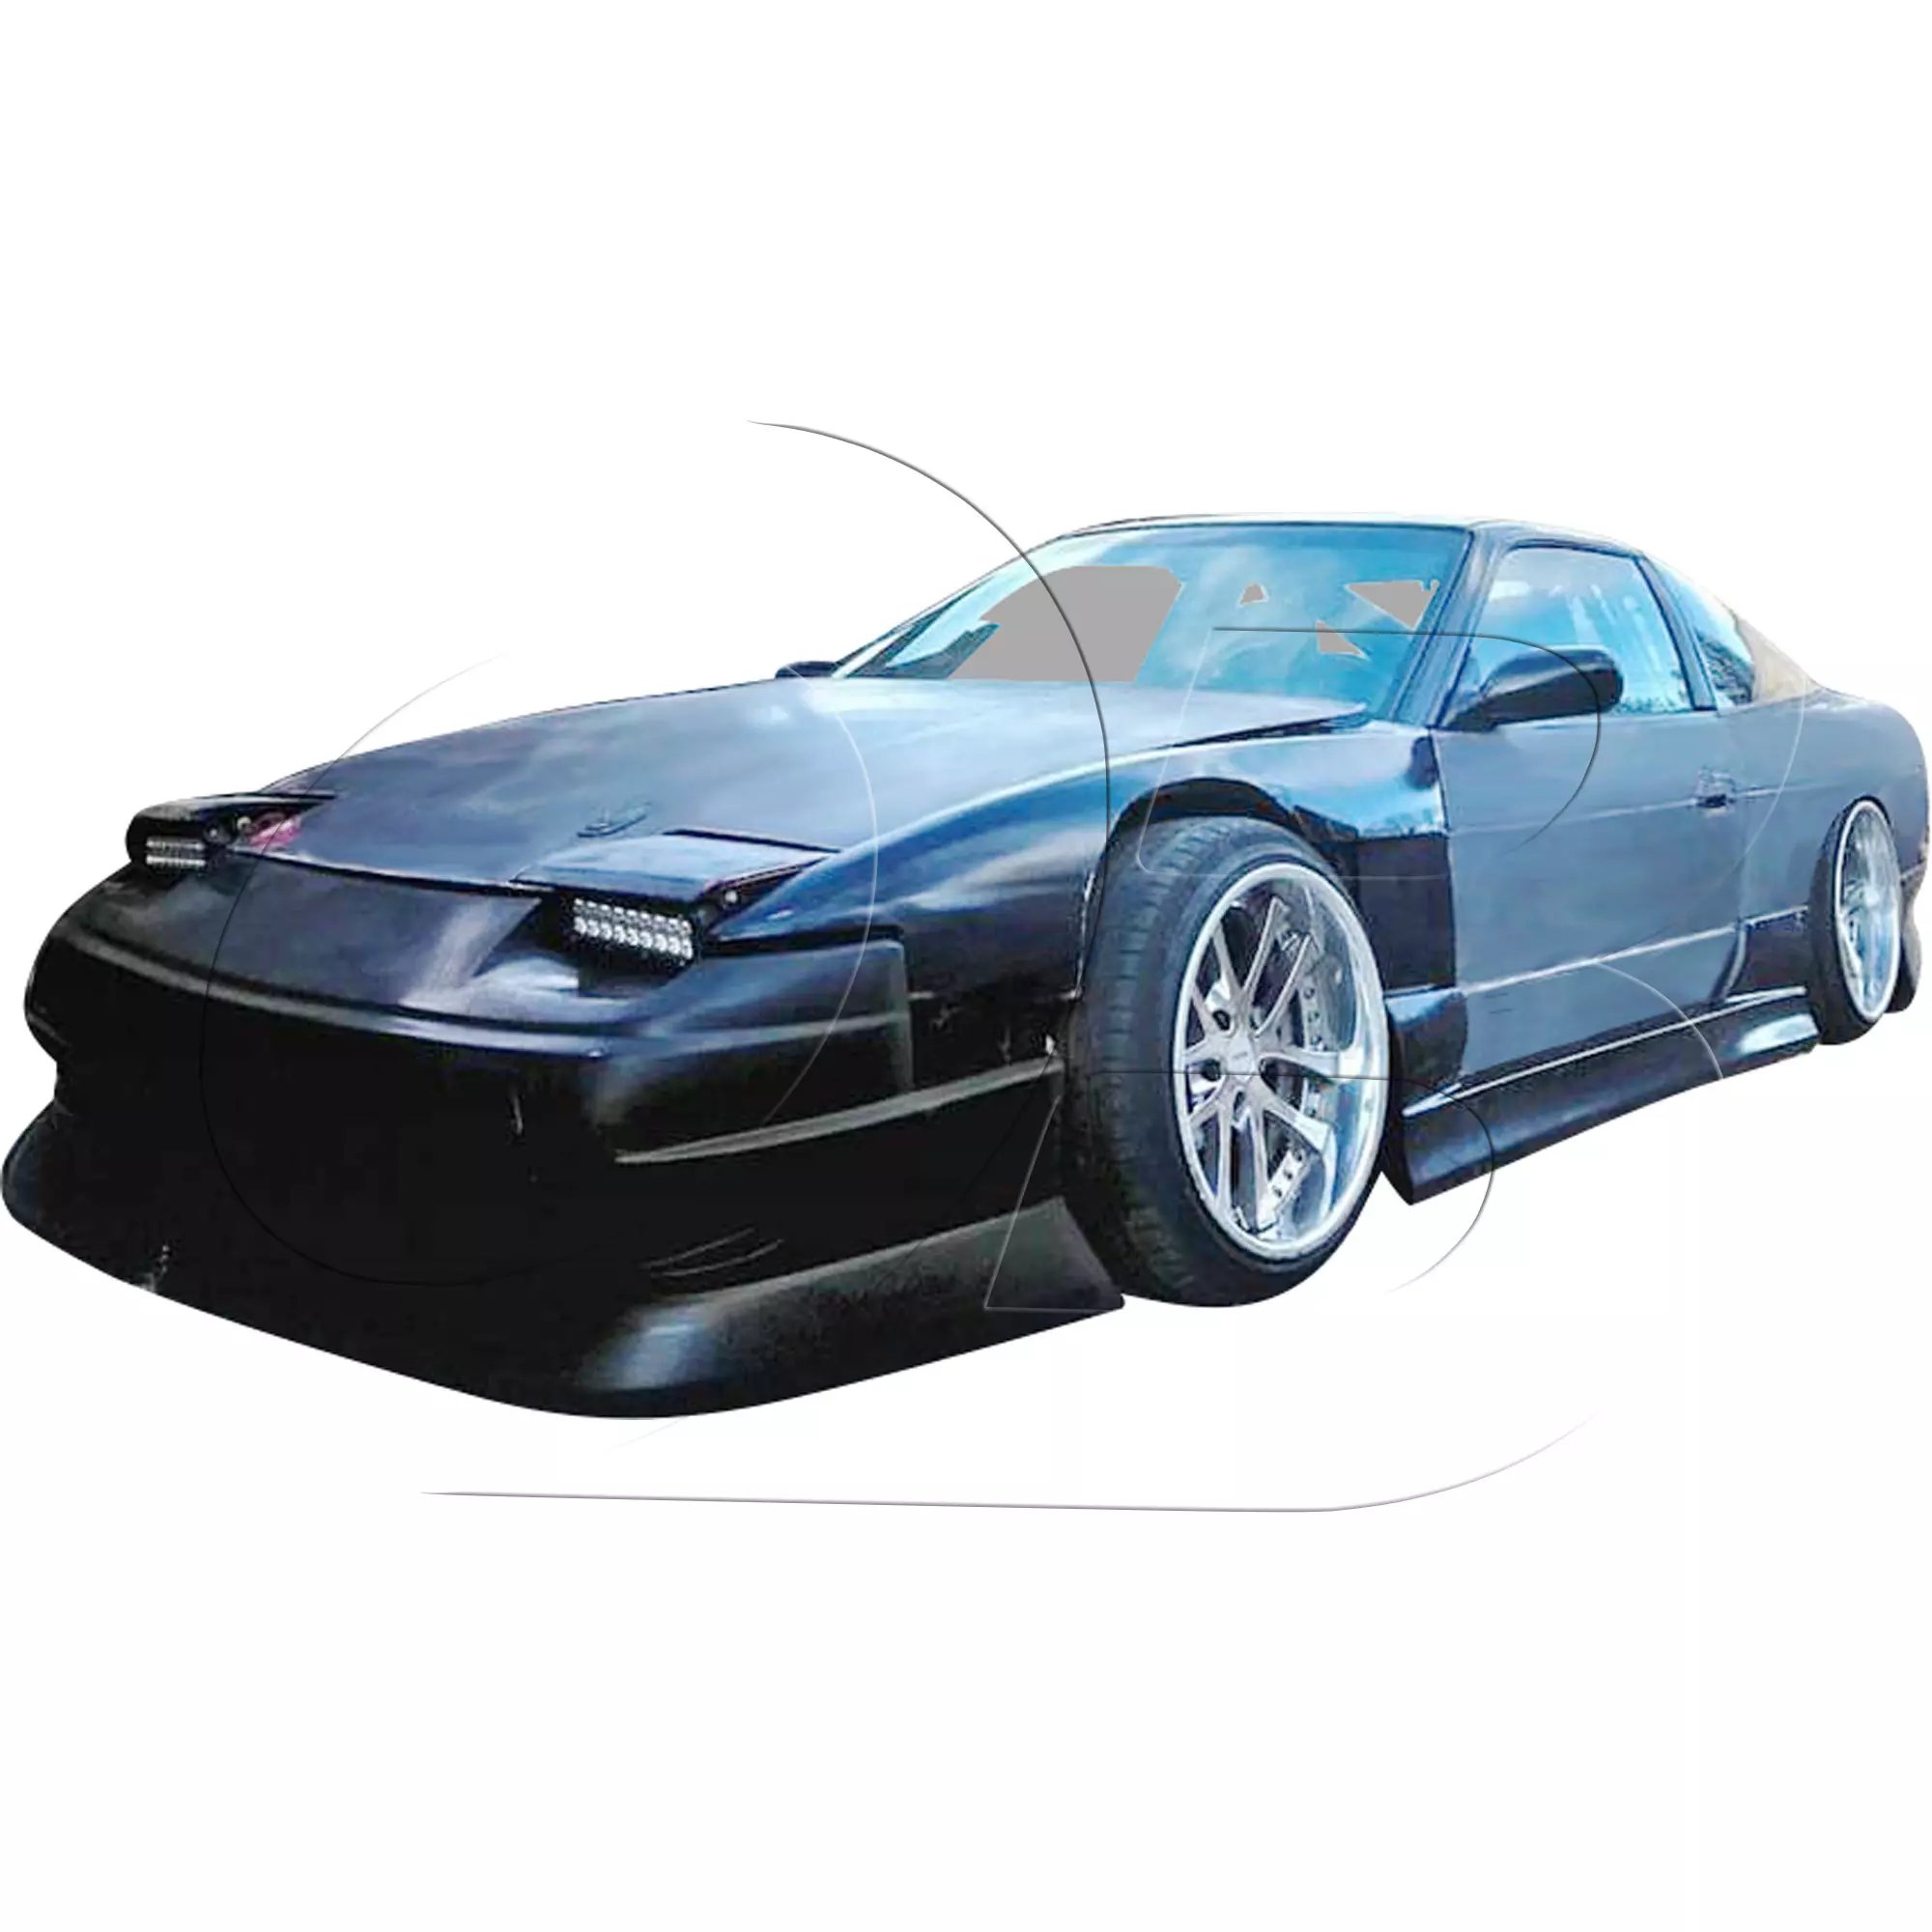 KBD Urethane Bsport2 Style 4pc Full Body Kit > Nissan 240SX 1989-1994 > 2dr Coupe - Image 76